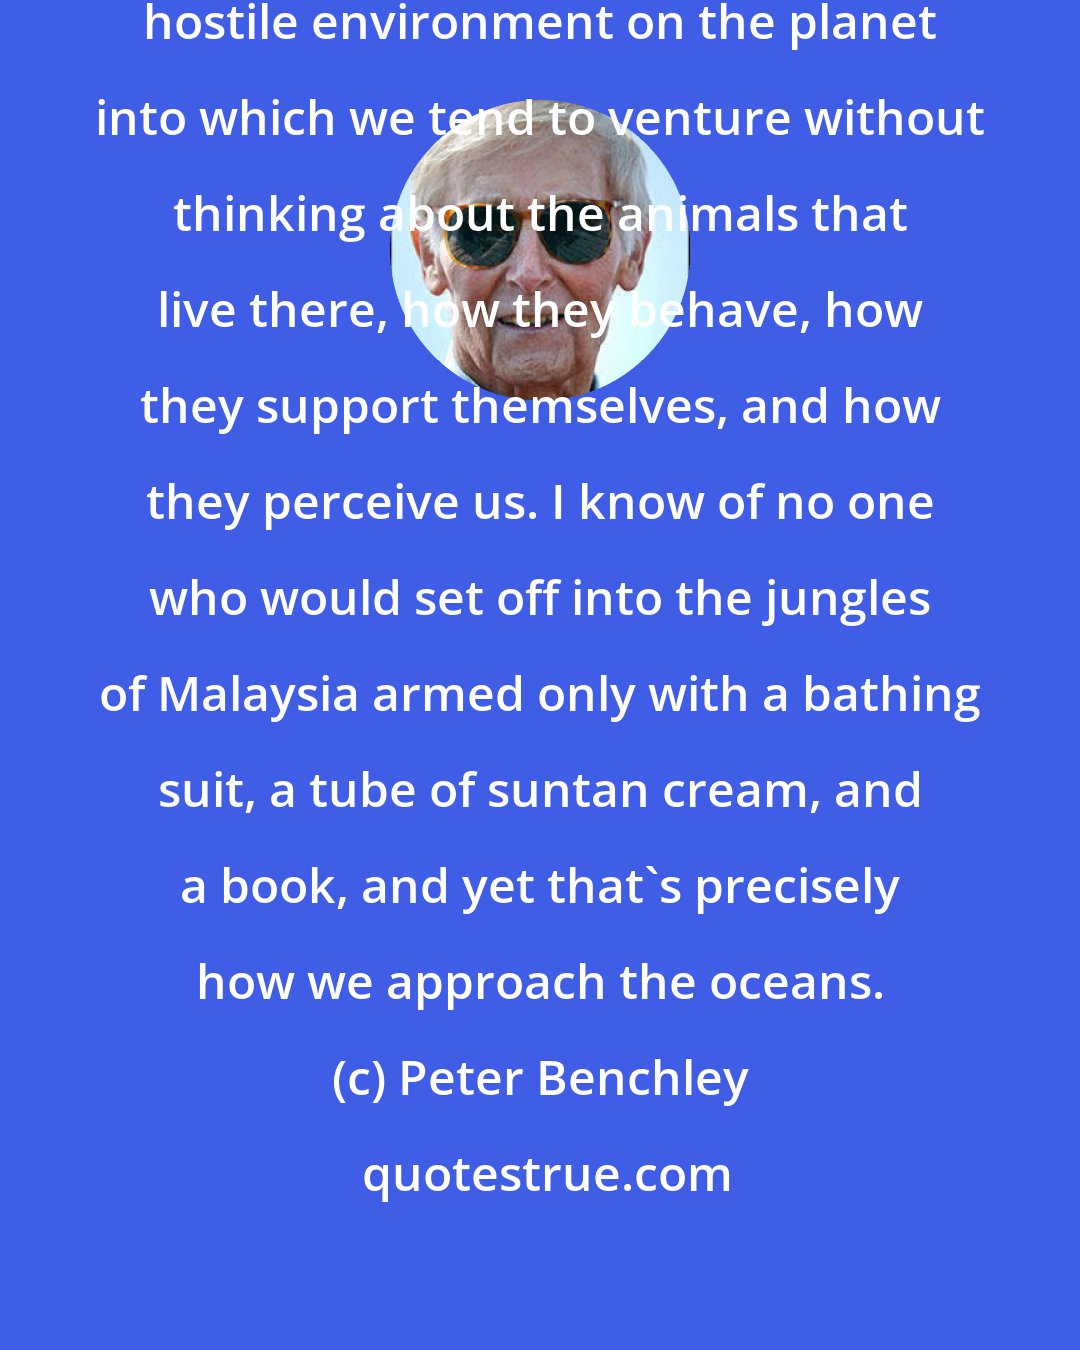 Peter Benchley: The ocean is the only alien and potentially hostile environment on the planet into which we tend to venture without thinking about the animals that live there, how they behave, how they support themselves, and how they perceive us. I know of no one who would set off into the jungles of Malaysia armed only with a bathing suit, a tube of suntan cream, and a book, and yet that's precisely how we approach the oceans.